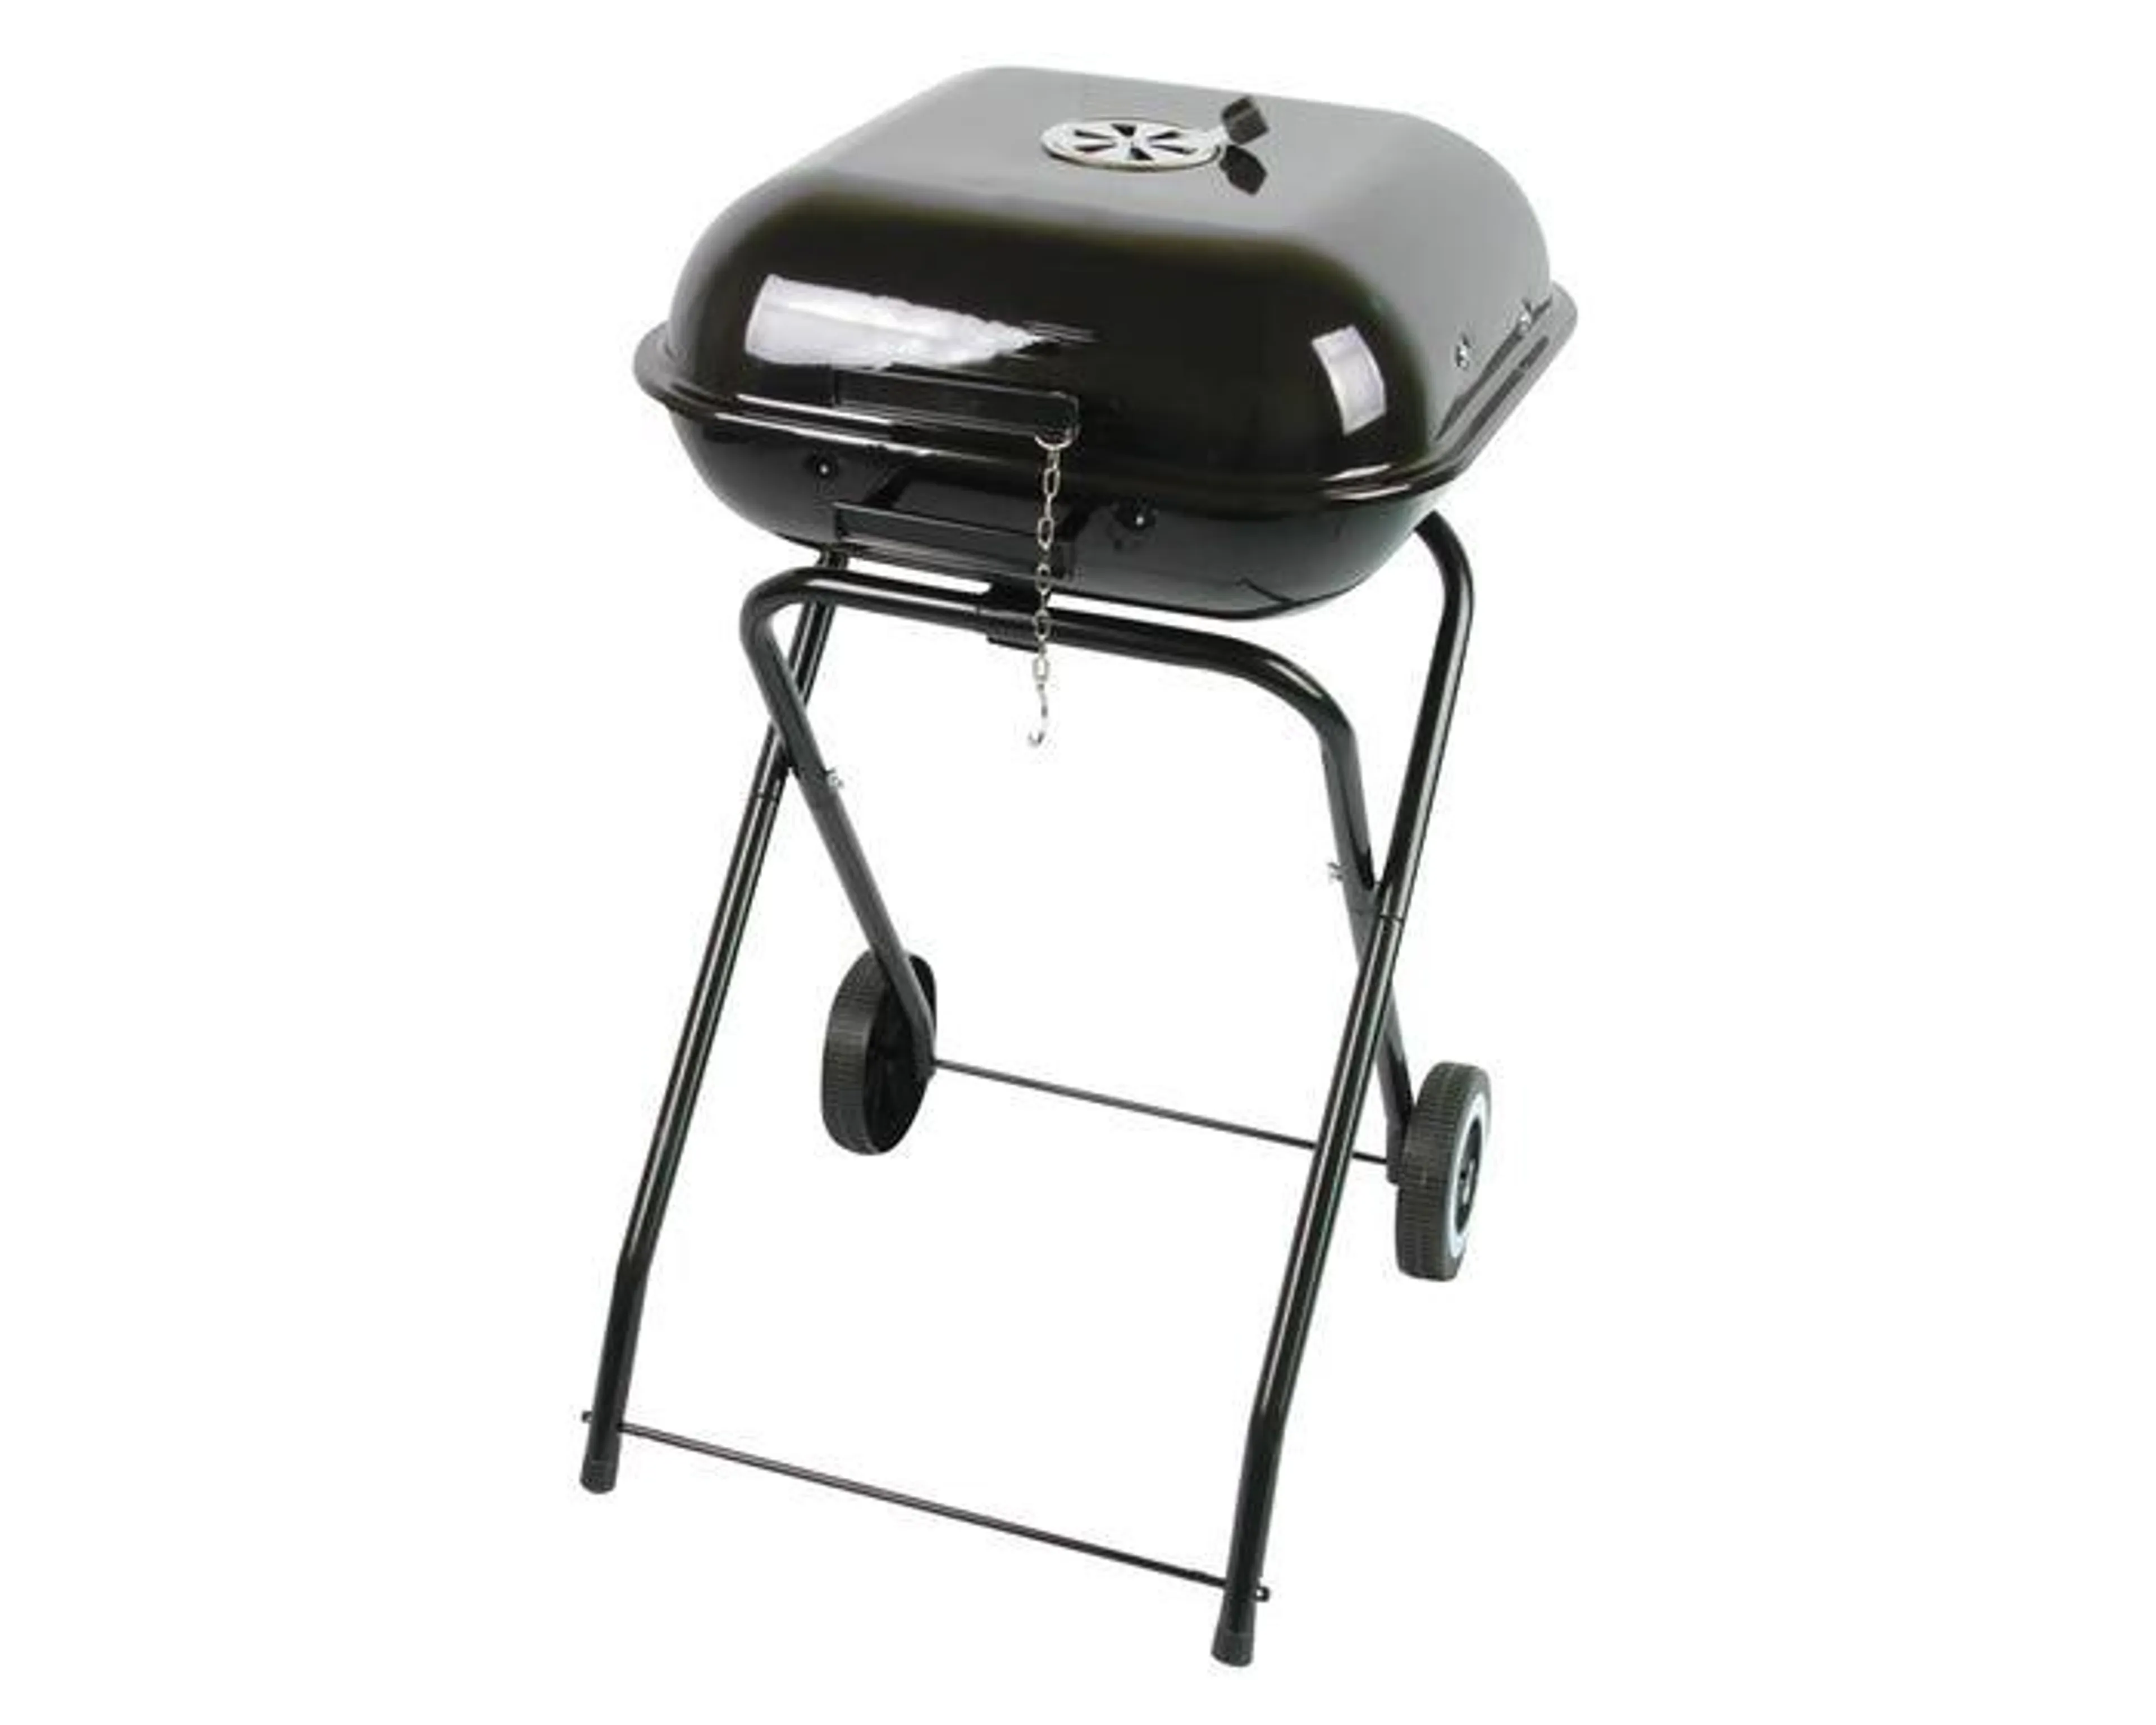 217 Grilling Co. 18" Sq Folding Kettle Grill - OG2104101-GY